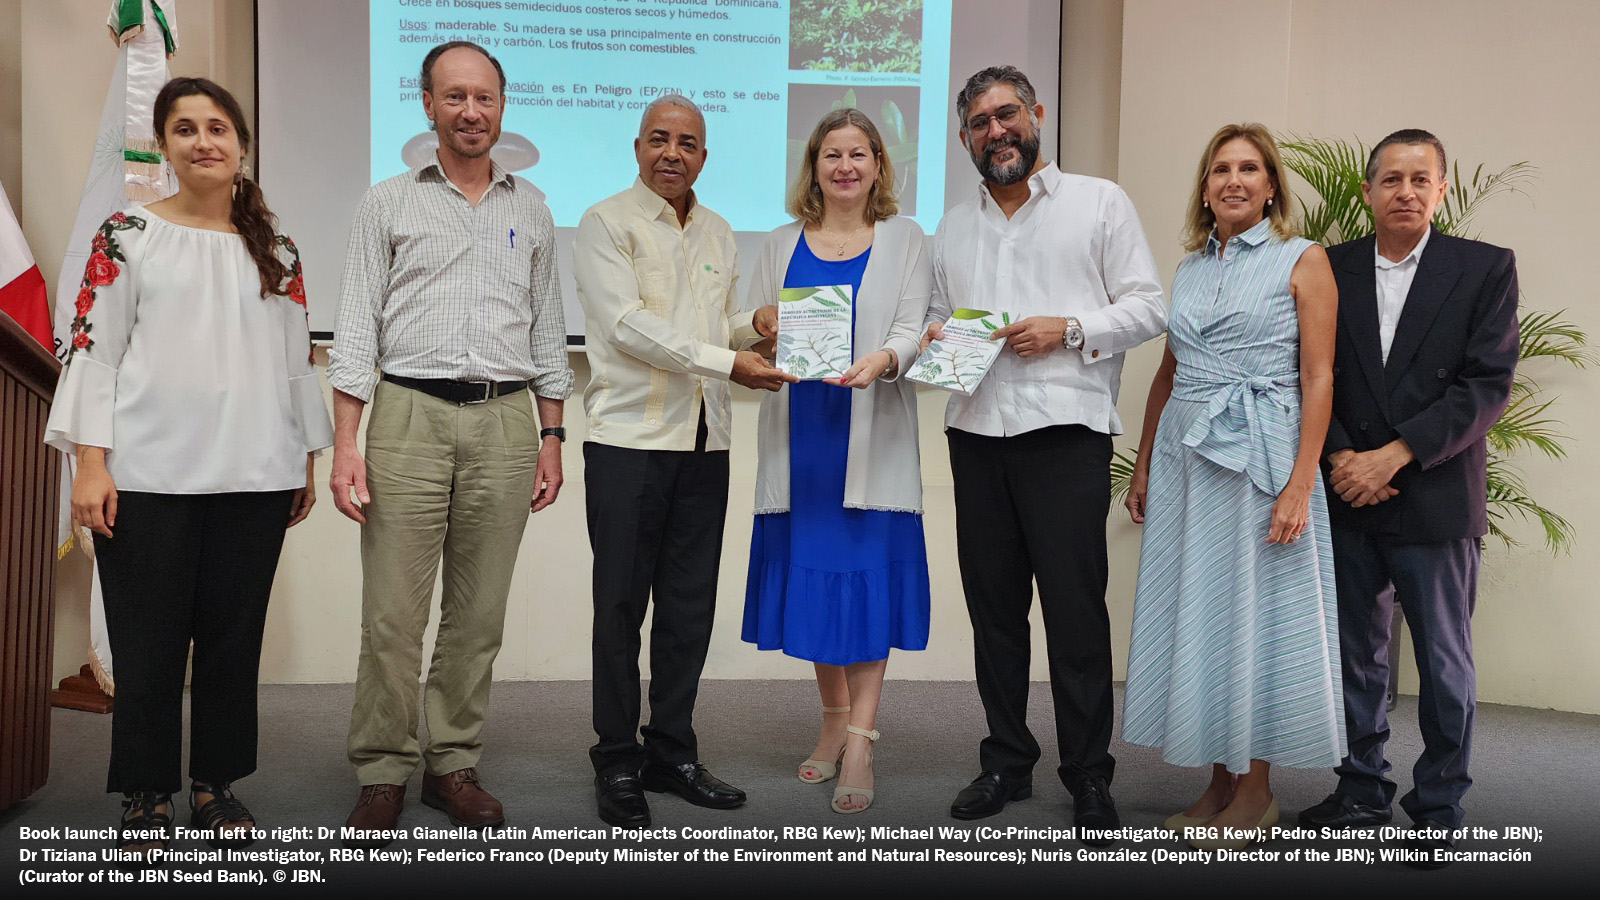 Seven conservationists pose for a photo at a book launch event in the Dominican Republic